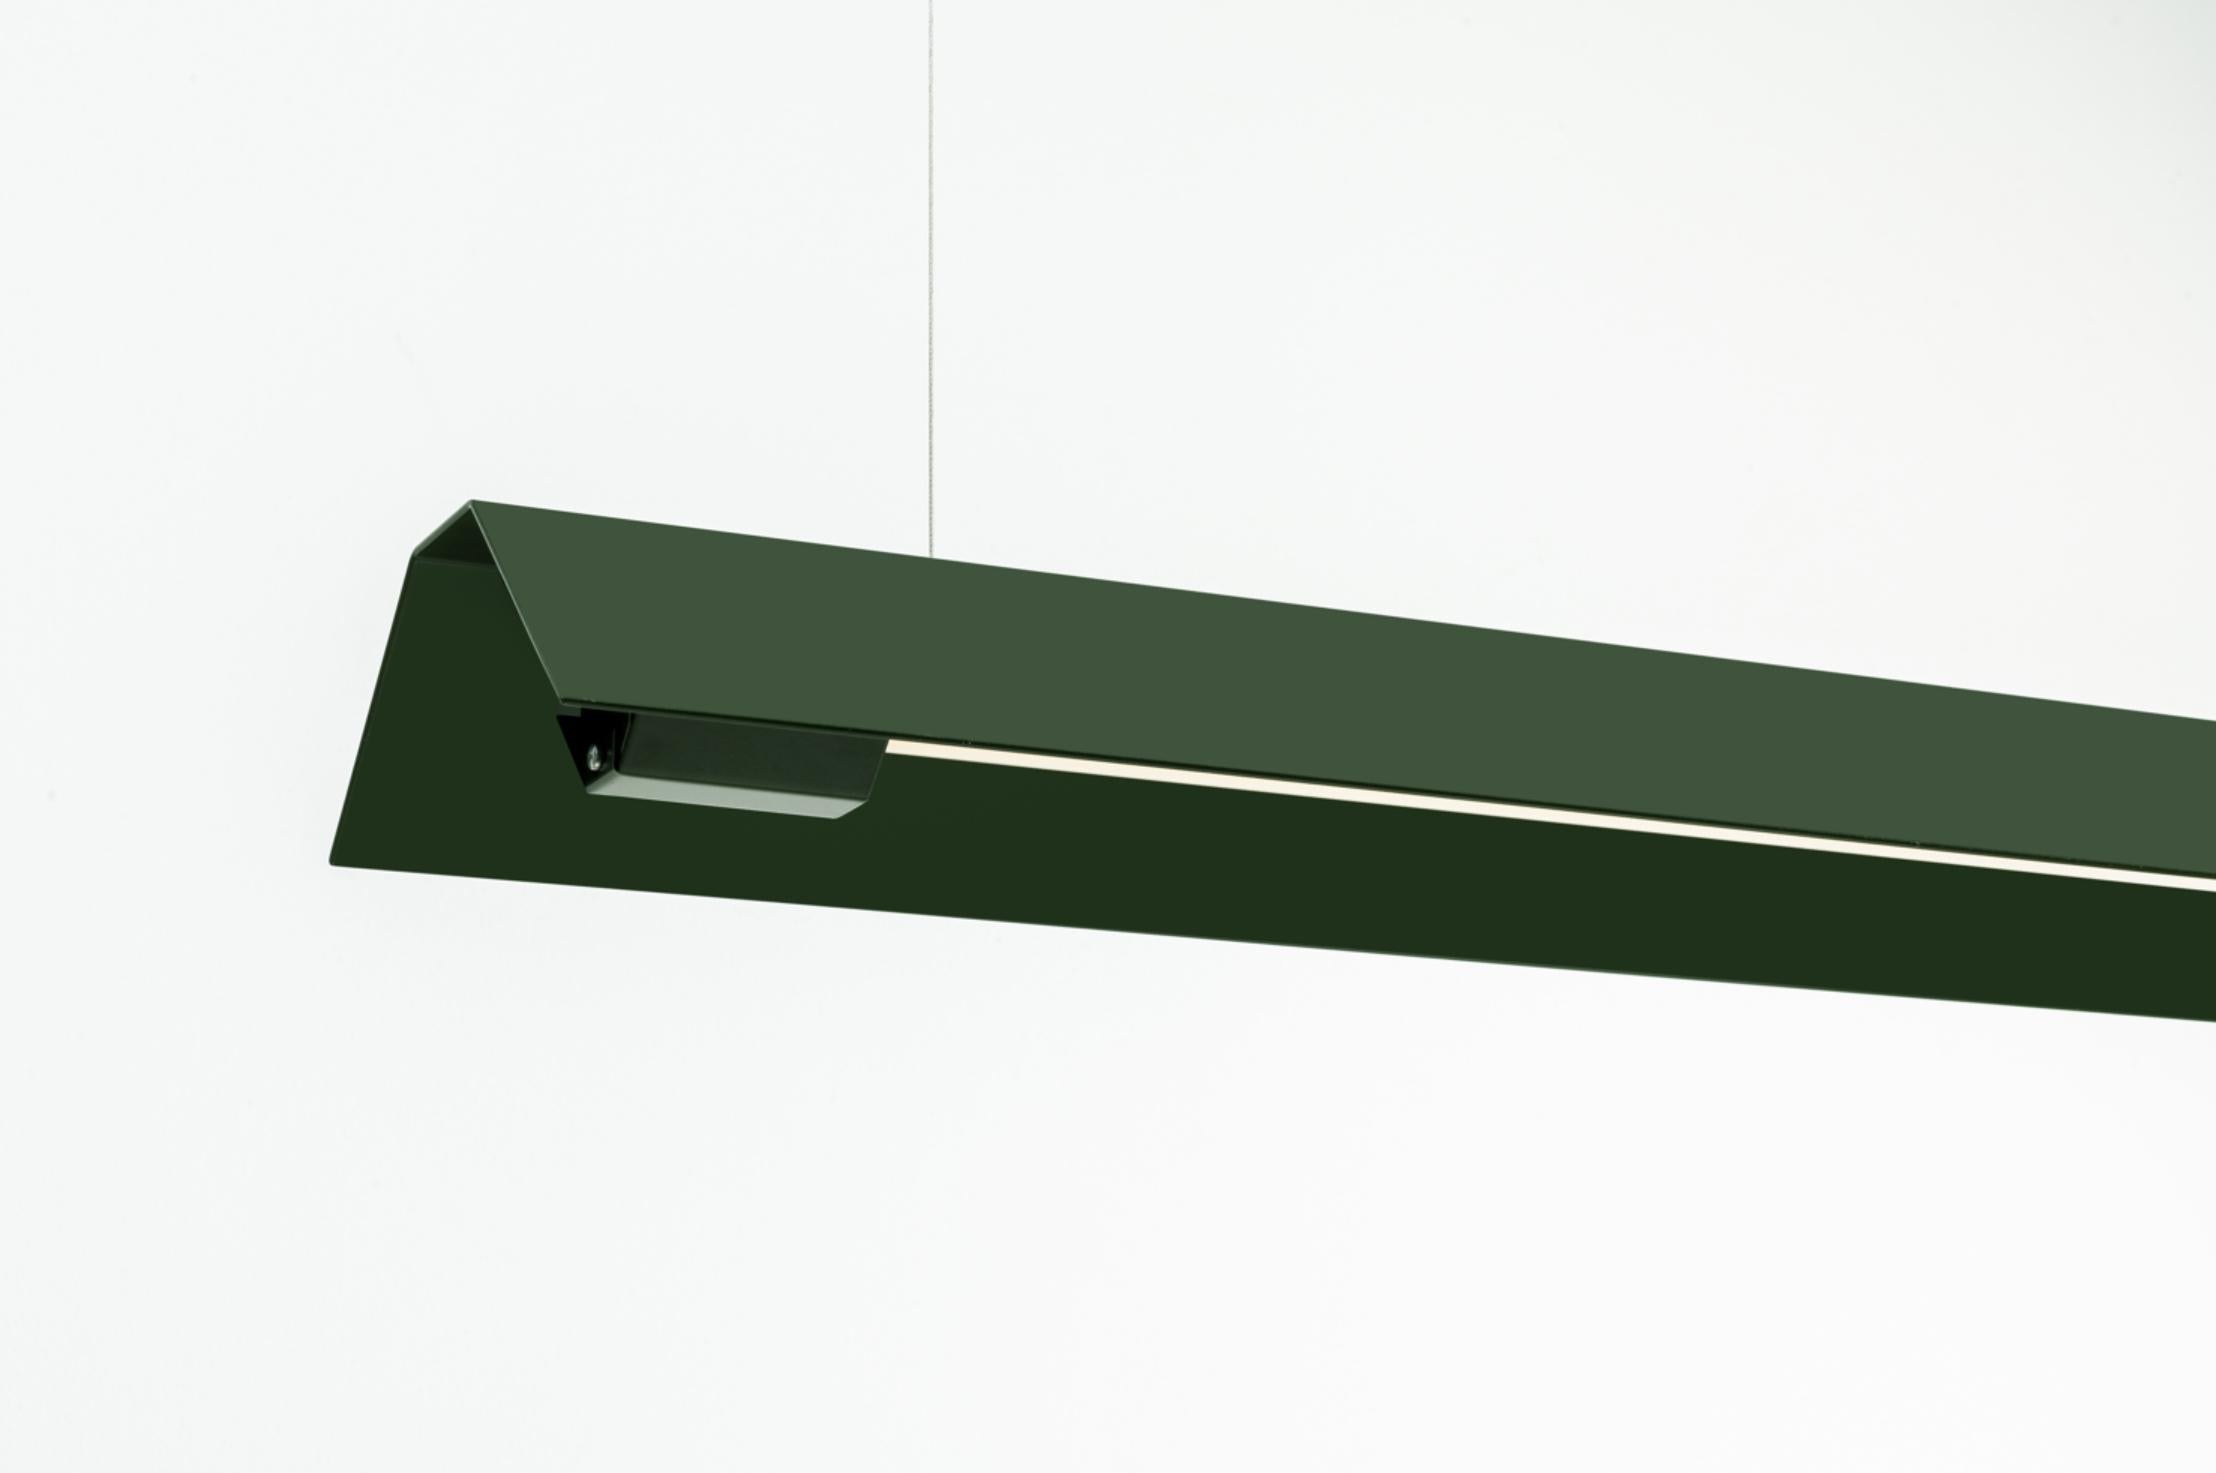 Extra Large Misalliance Ral bottle green suspended light by Lexavala
Dimensions: D 16 x W 160 x H 8 cm
Materials: powder coated aluminium.

There are two lenghts of socket covers, extending over the LED. Two short are to be found in Suspended